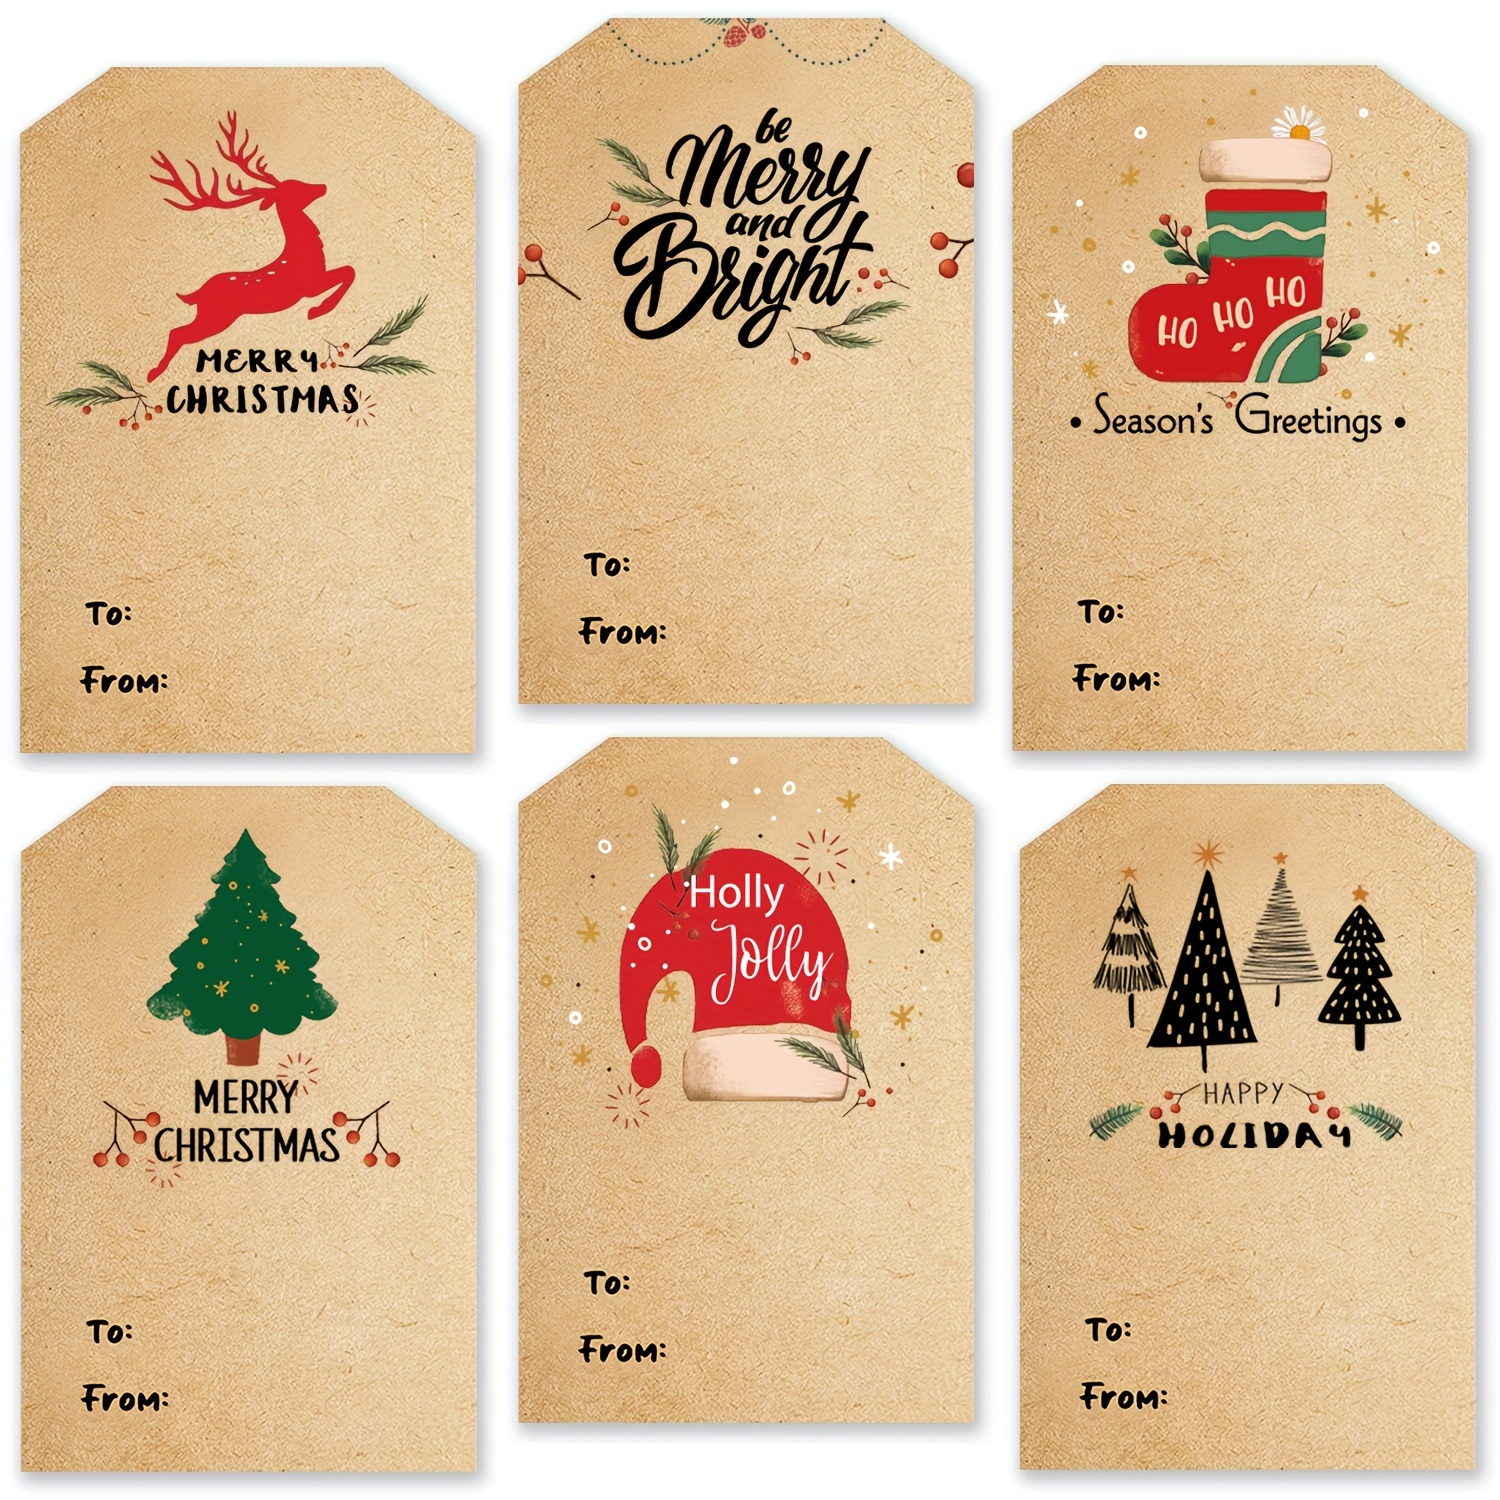 Christmas Gift Tags. 3 Different Style Gift Tags for Christmas